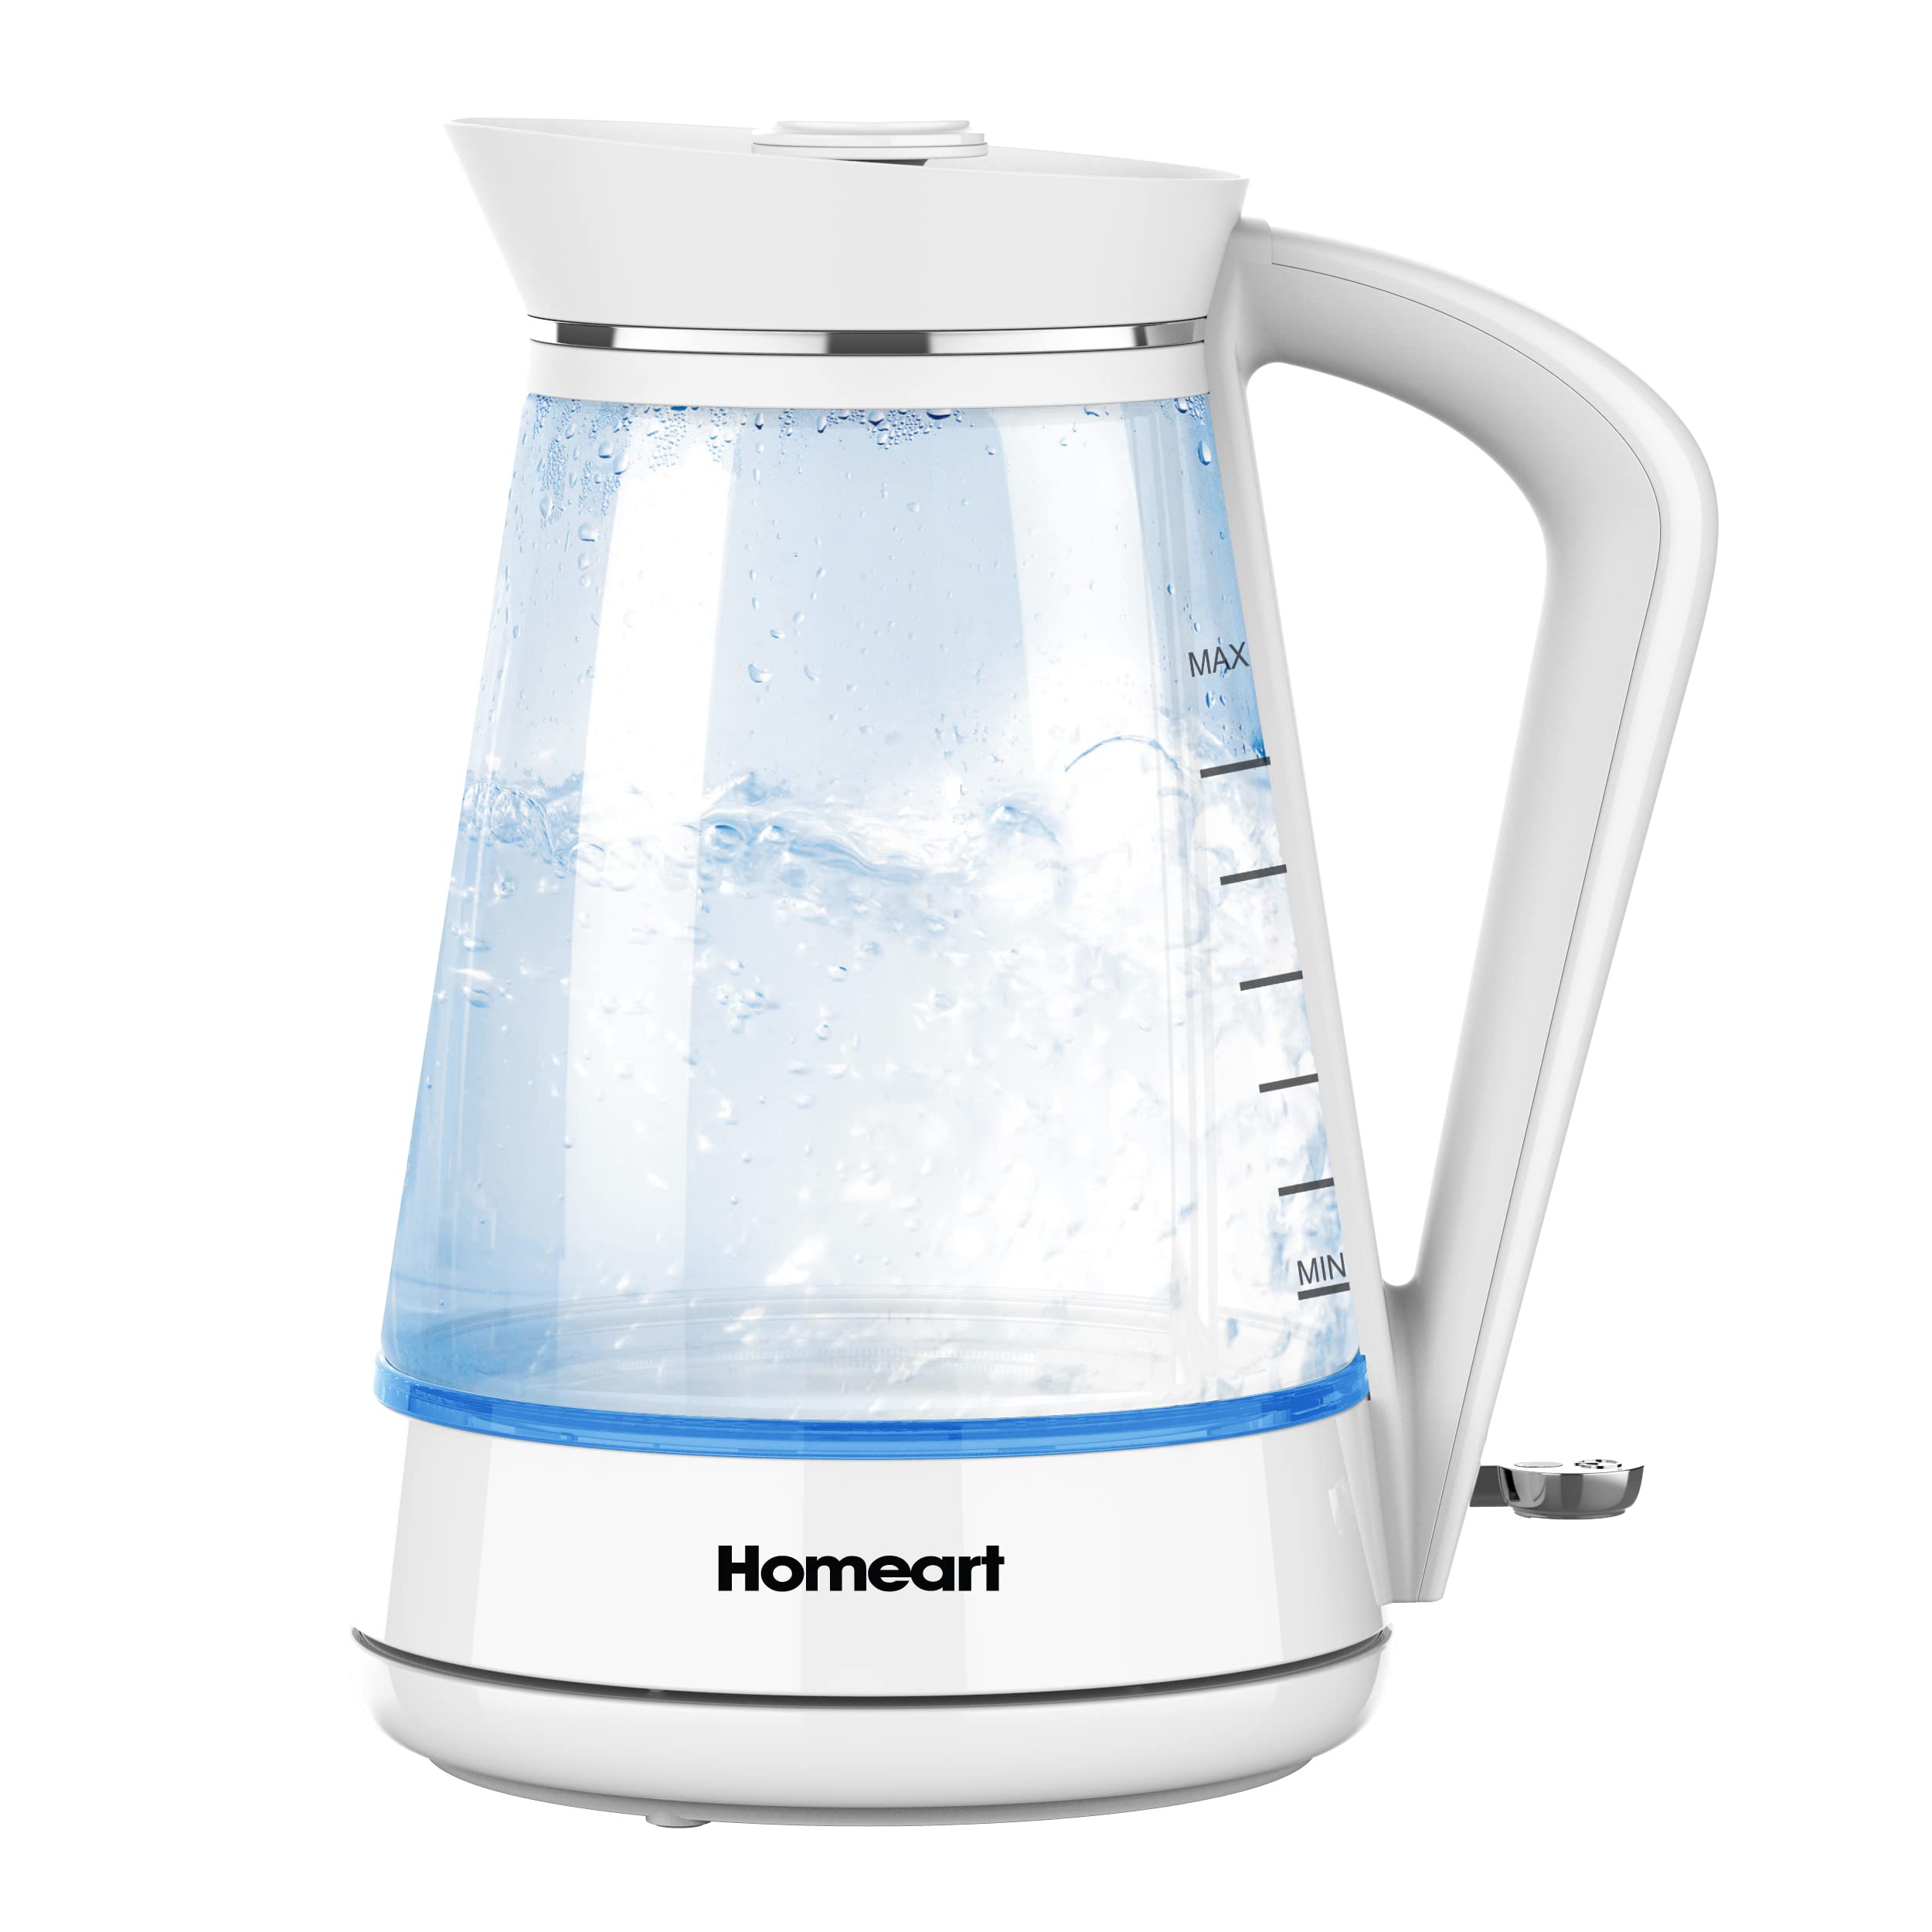 Homeart Urban Cordless Electric Glass Kettle - Stainless Steel With Removable Filter, Fast Boiling and Auto Shut-off - 1.7L Capacity, White